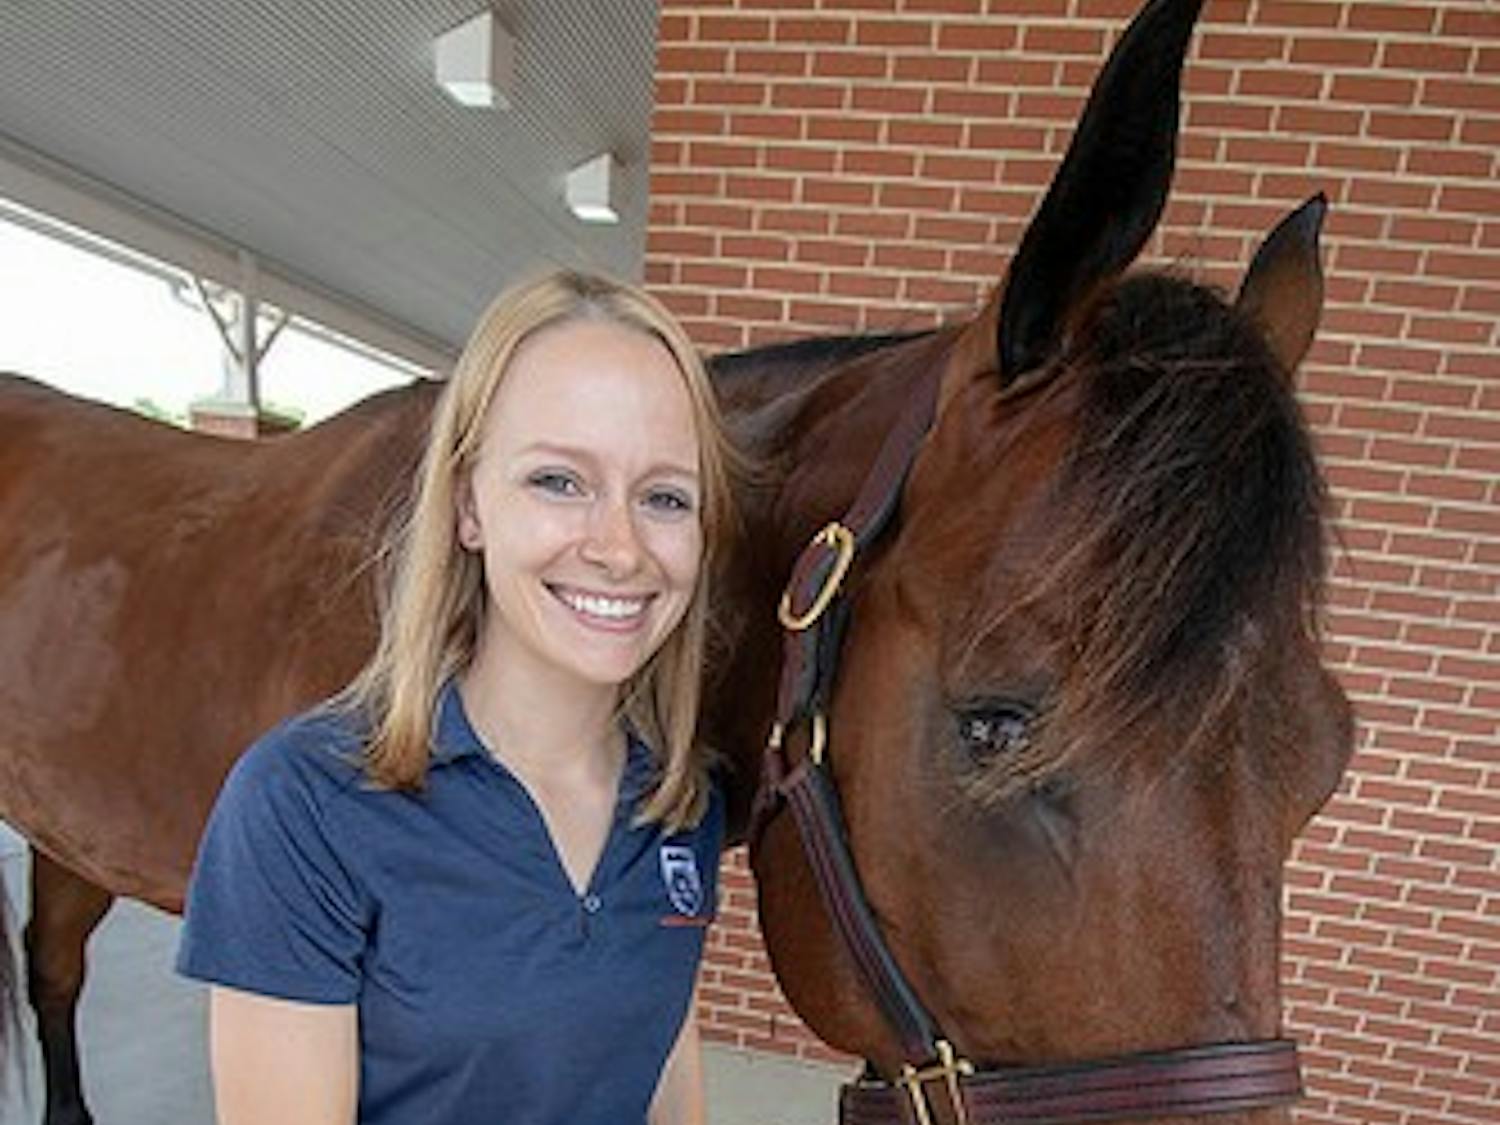 Rachel Pfeifle, a fourth-year student at Auburn University’s College of Veterinary Medicine, has been awarded a national $75,000 Coyote Rock Ranch Veterinary Scholarship.